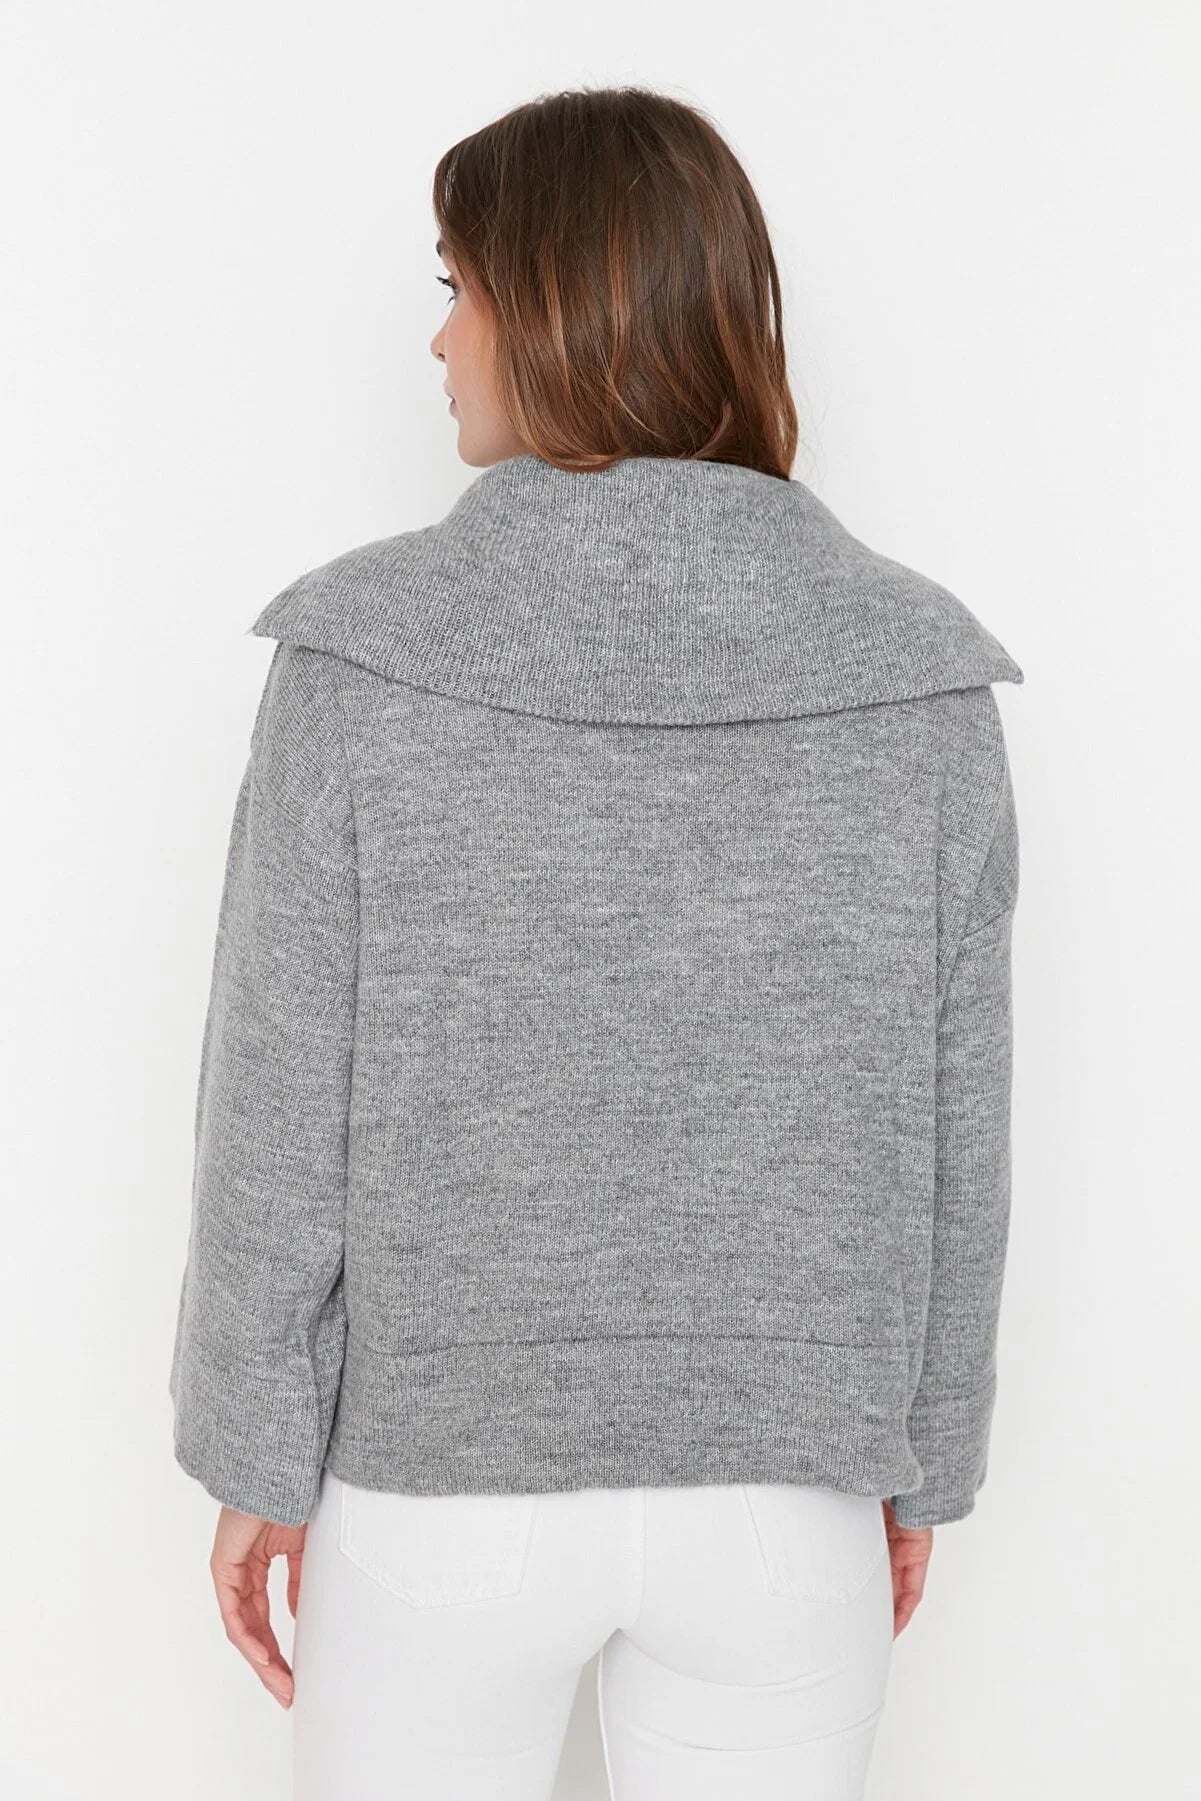 Grey Half Zip Pullover With Bell Sleeves